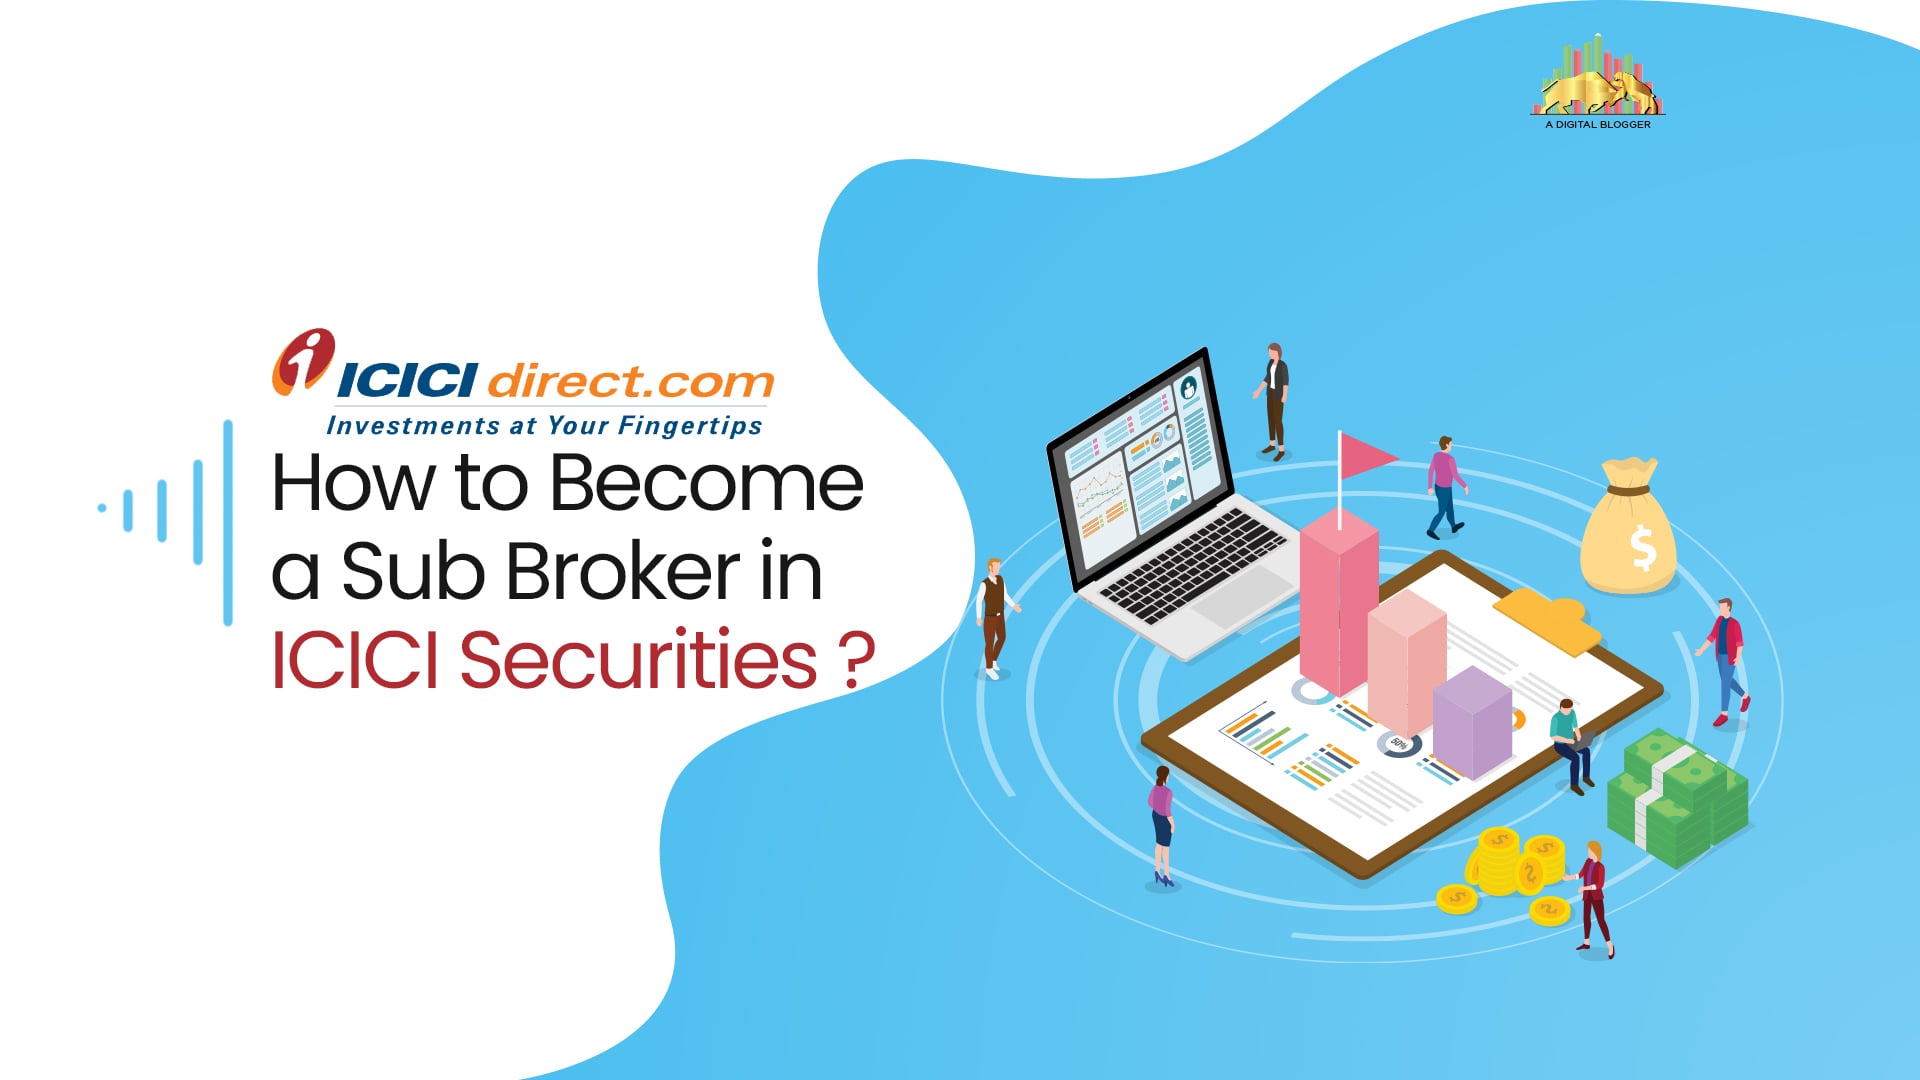 How to Become a Sub Broker in ICICI Securities?